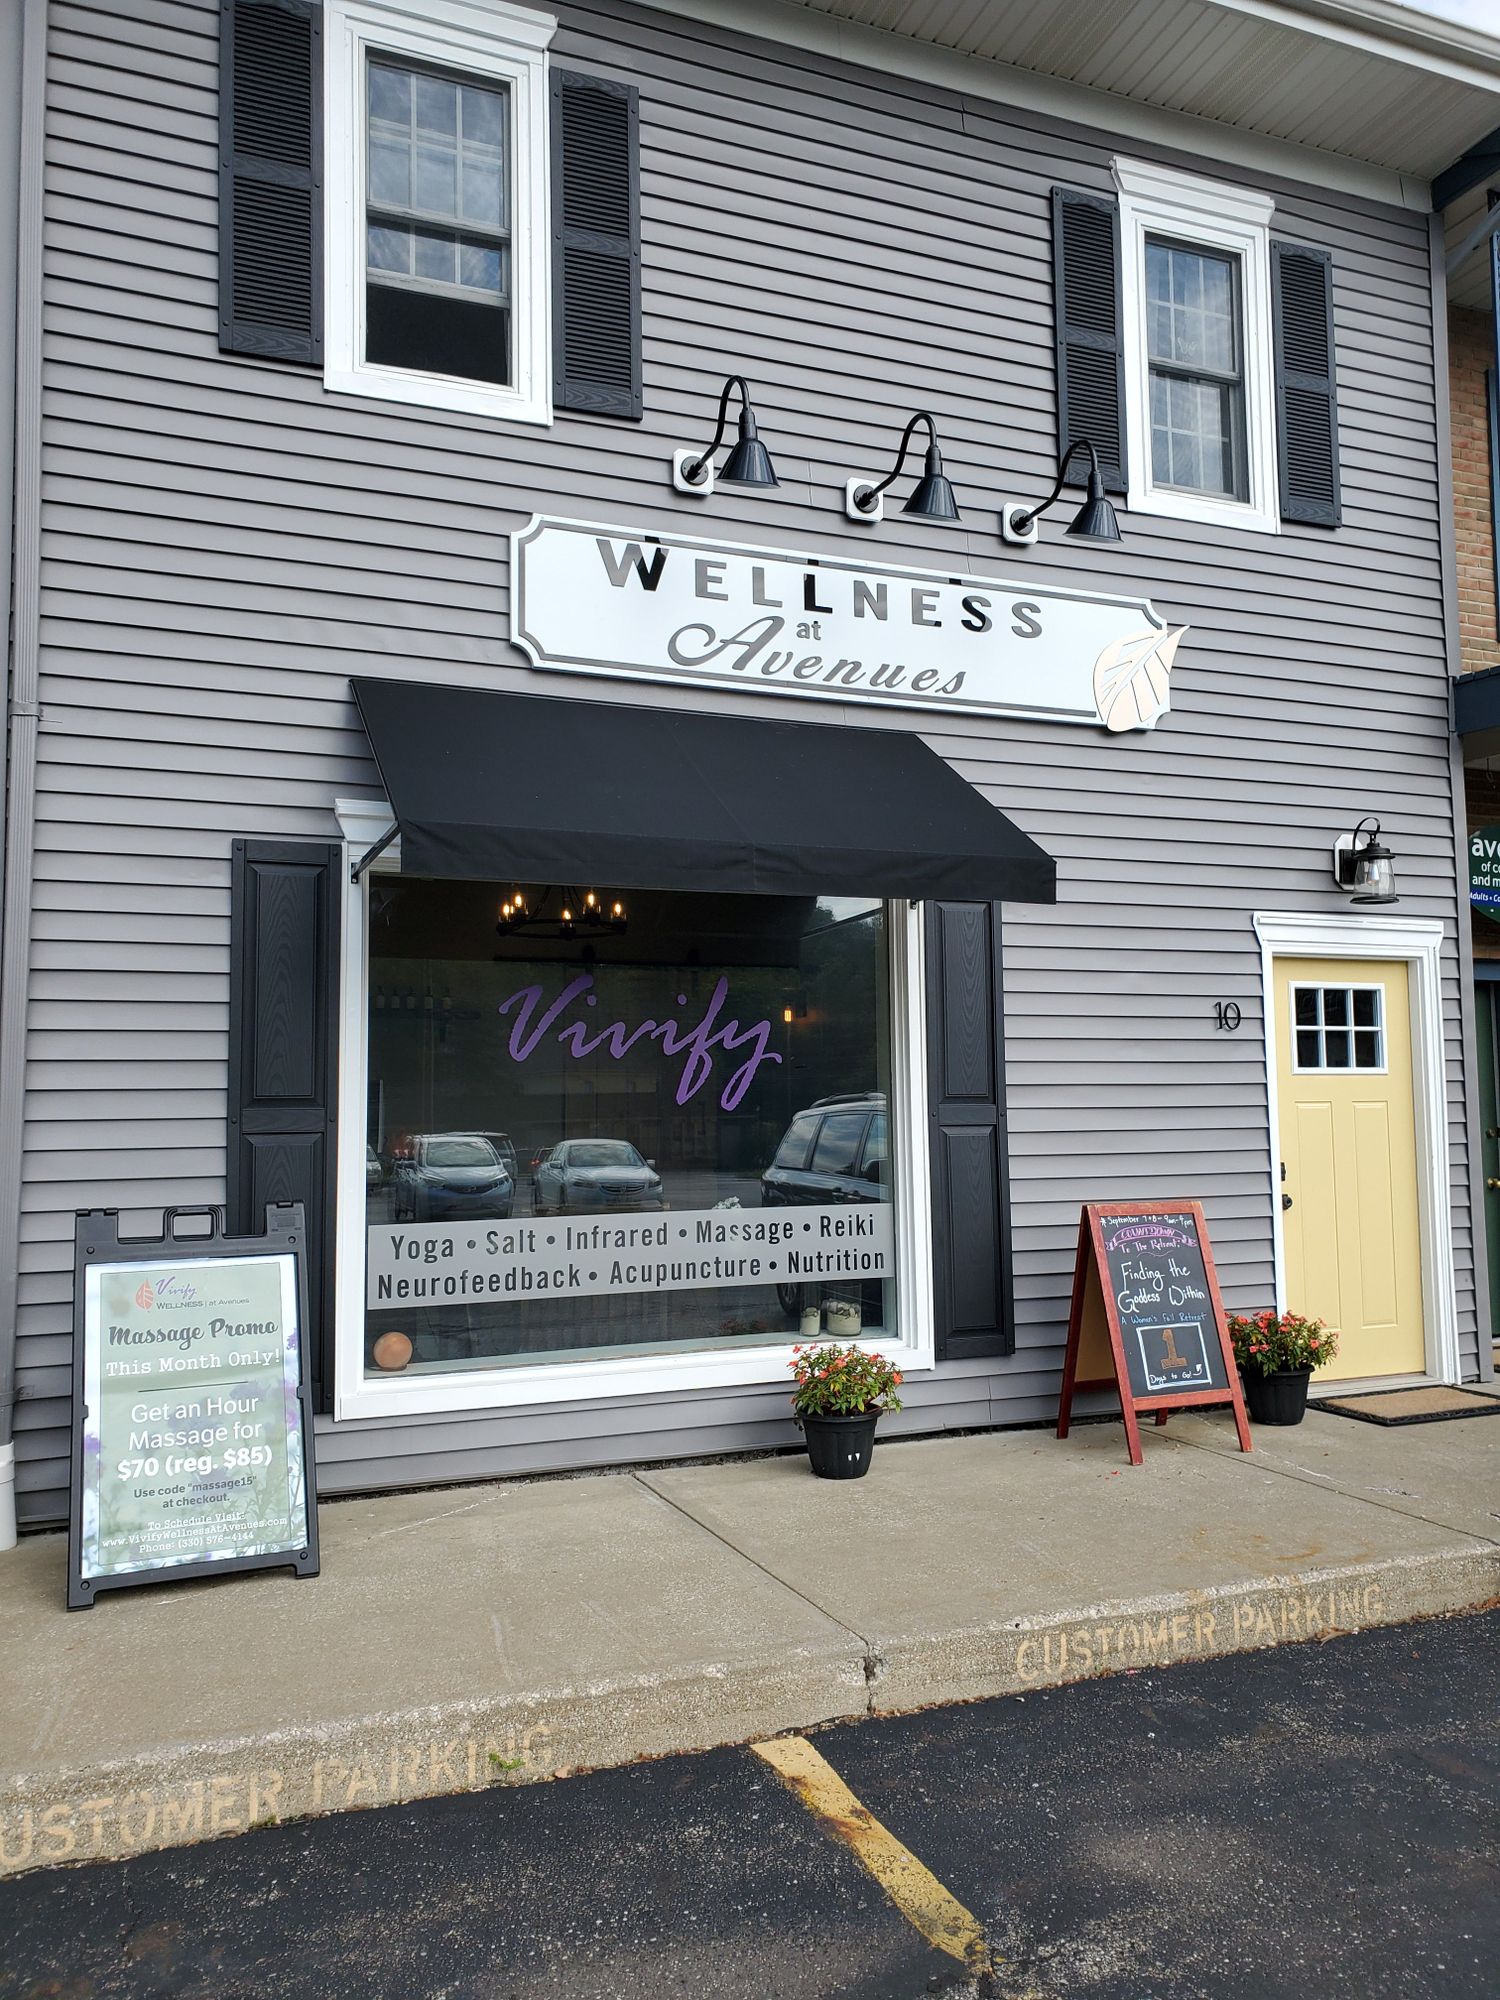 Gallery Photo of Our conveniently located wellness center, in Ghent Square Plaza, in Bath Township, West Akron.